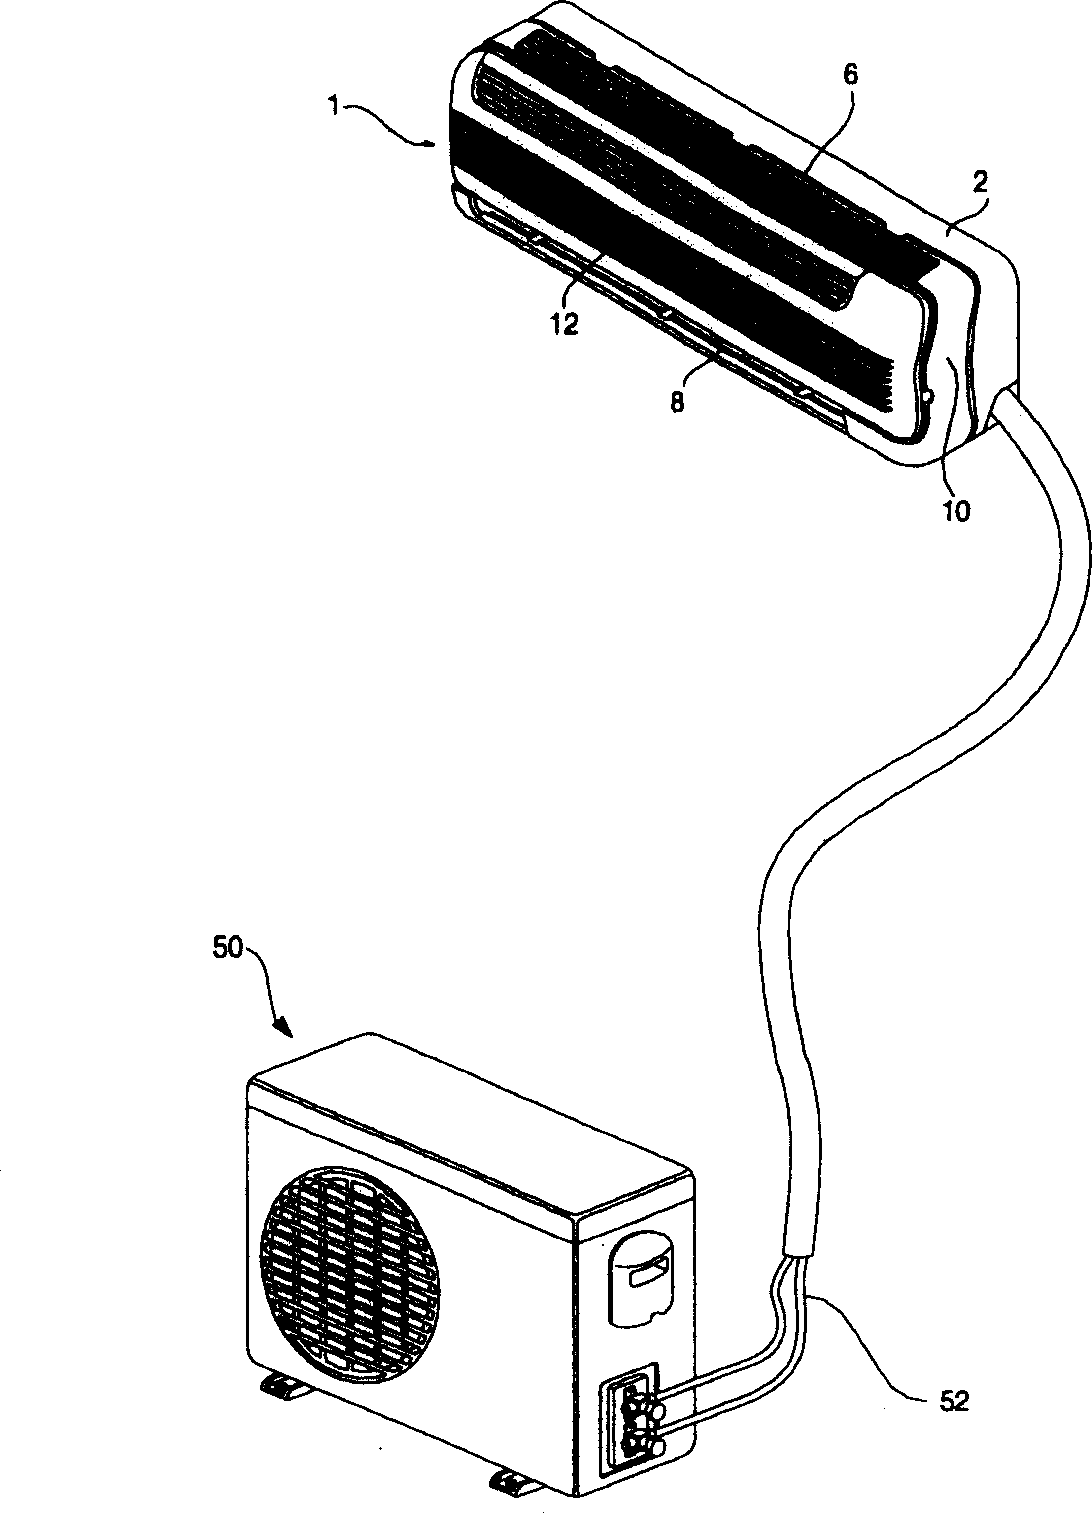 Air cleaning system for air conditioner